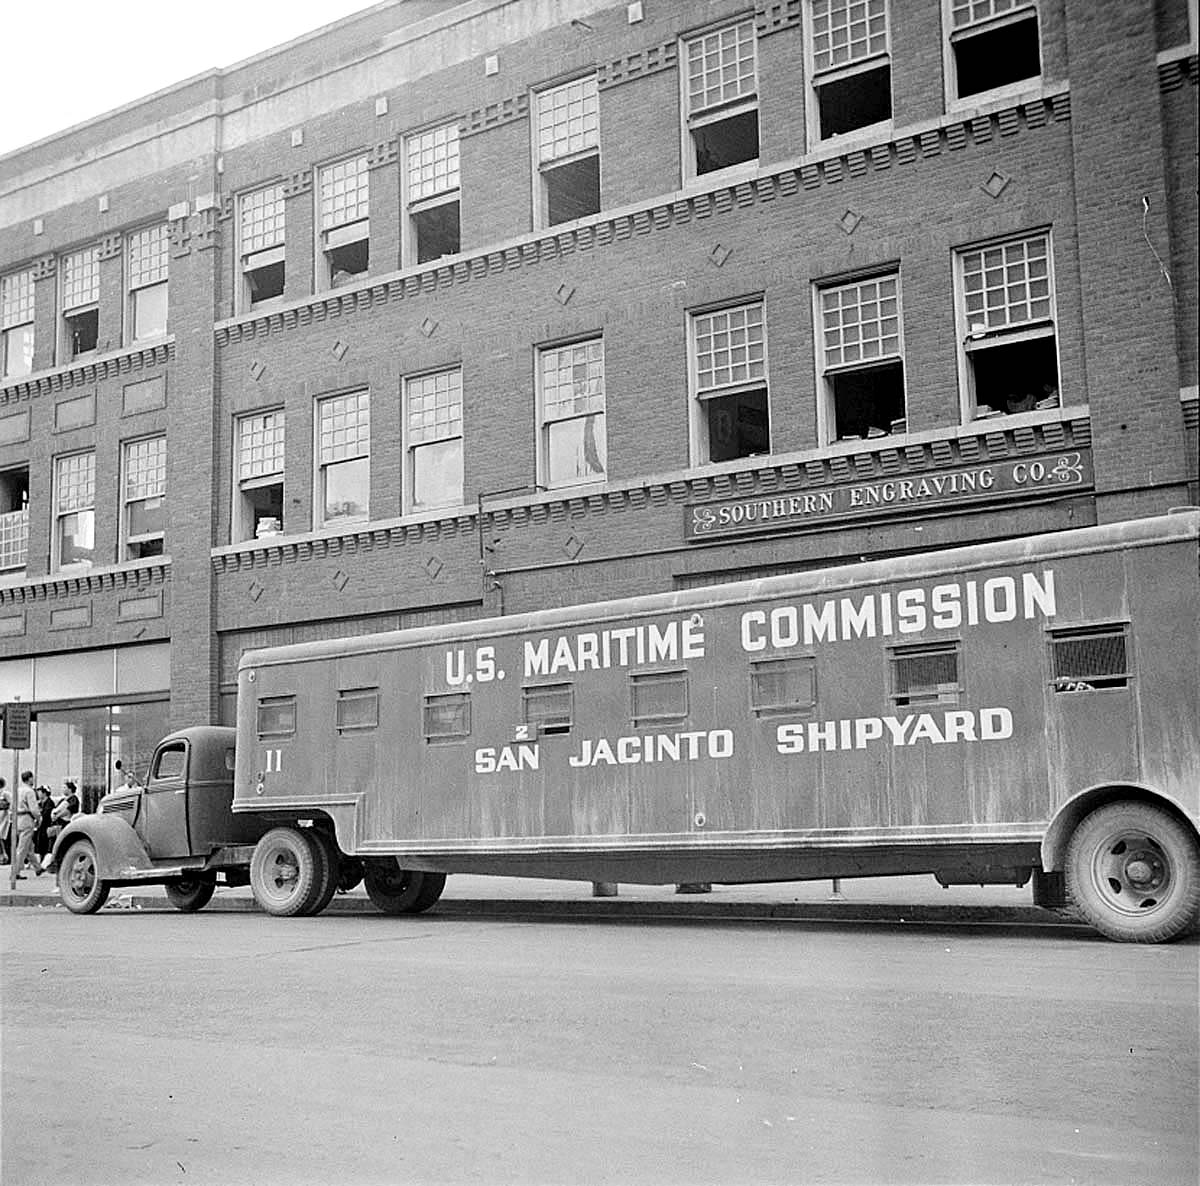 Houston. U.S. Maritime Commission bus for transporting shipyard workers, 1943